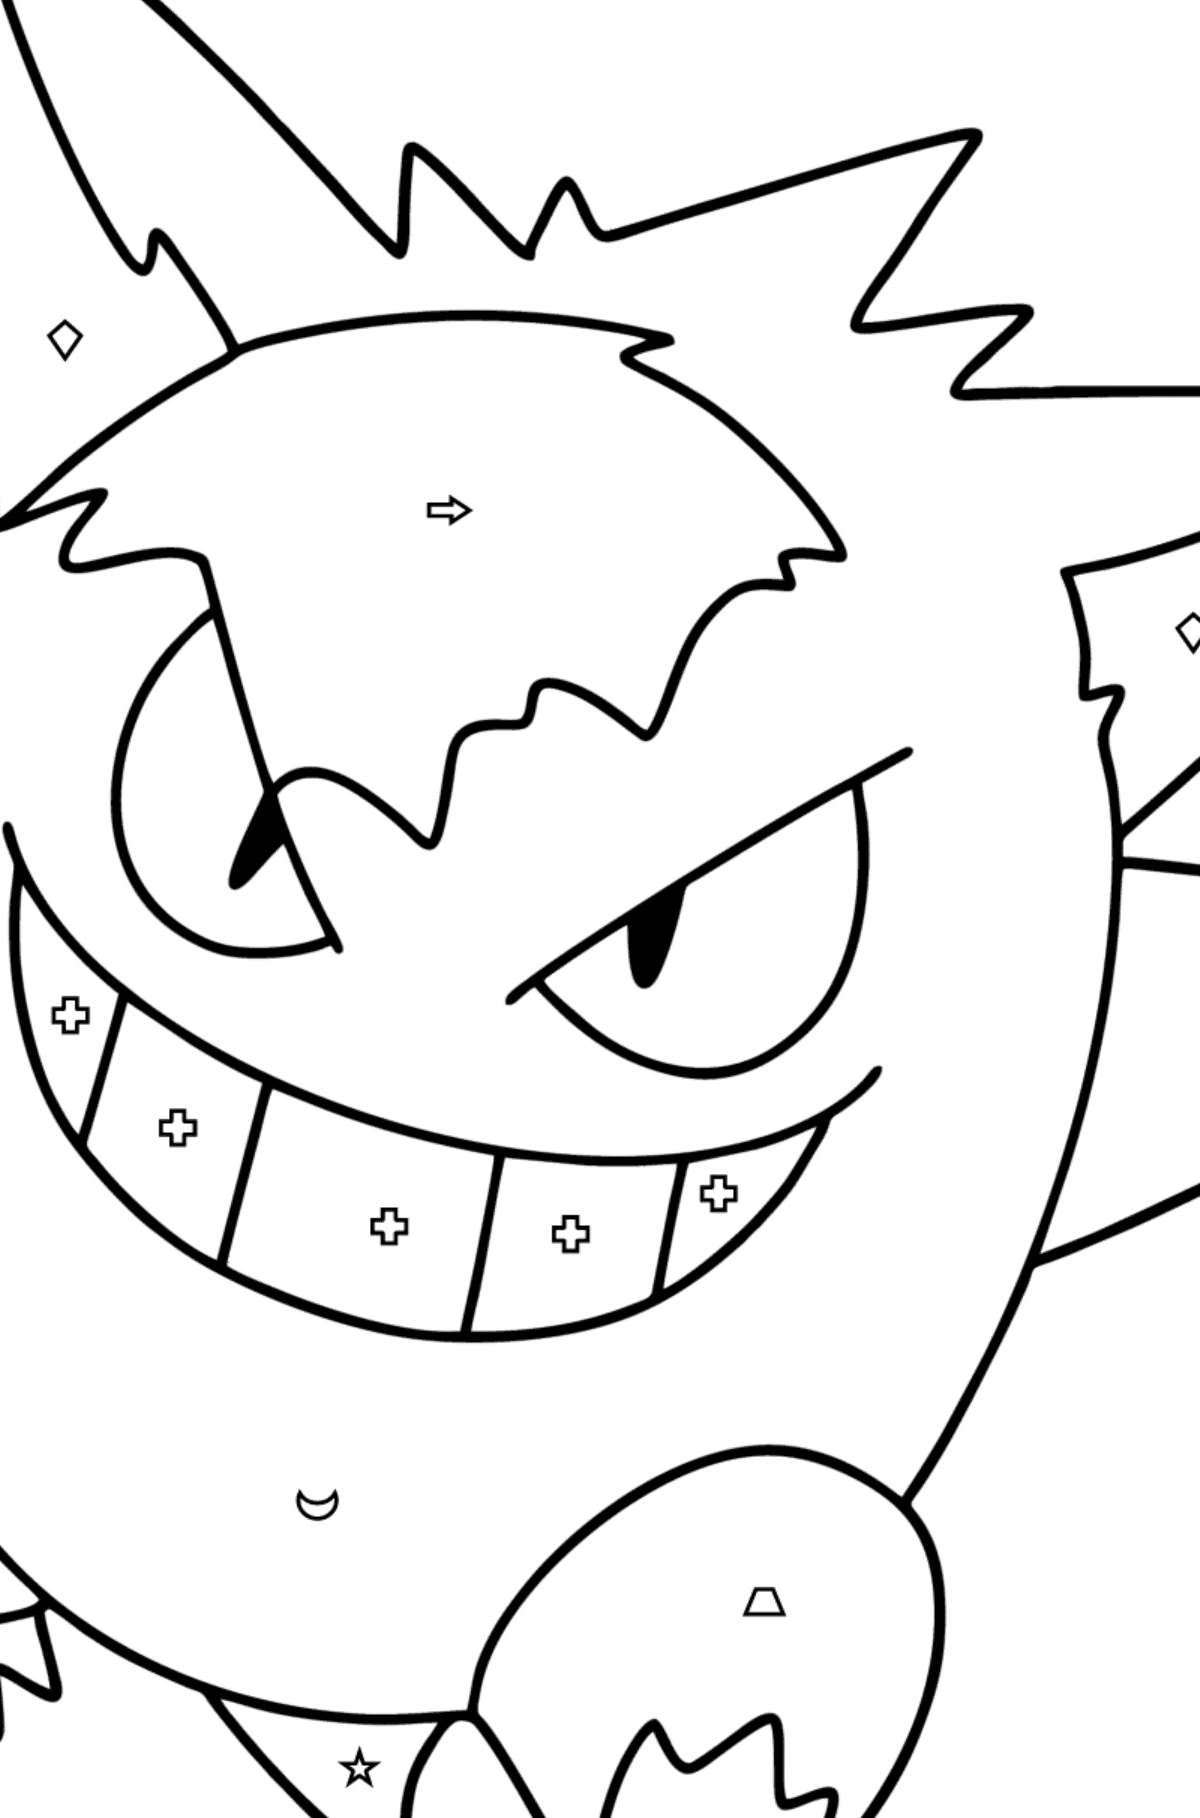 Pokémon Go Gengar coloring page - Coloring by Geometric Shapes for Kids